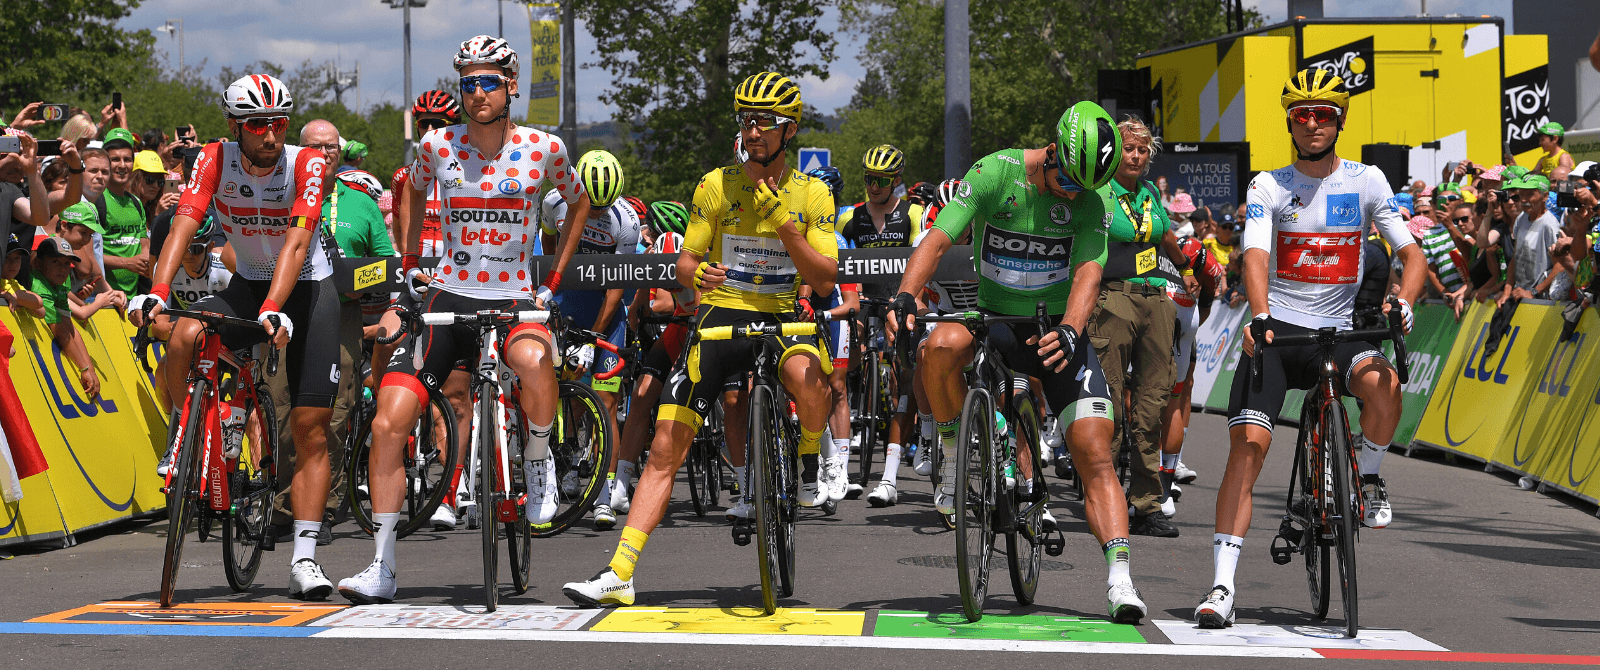 Cyclists lined up to race the Tour de France